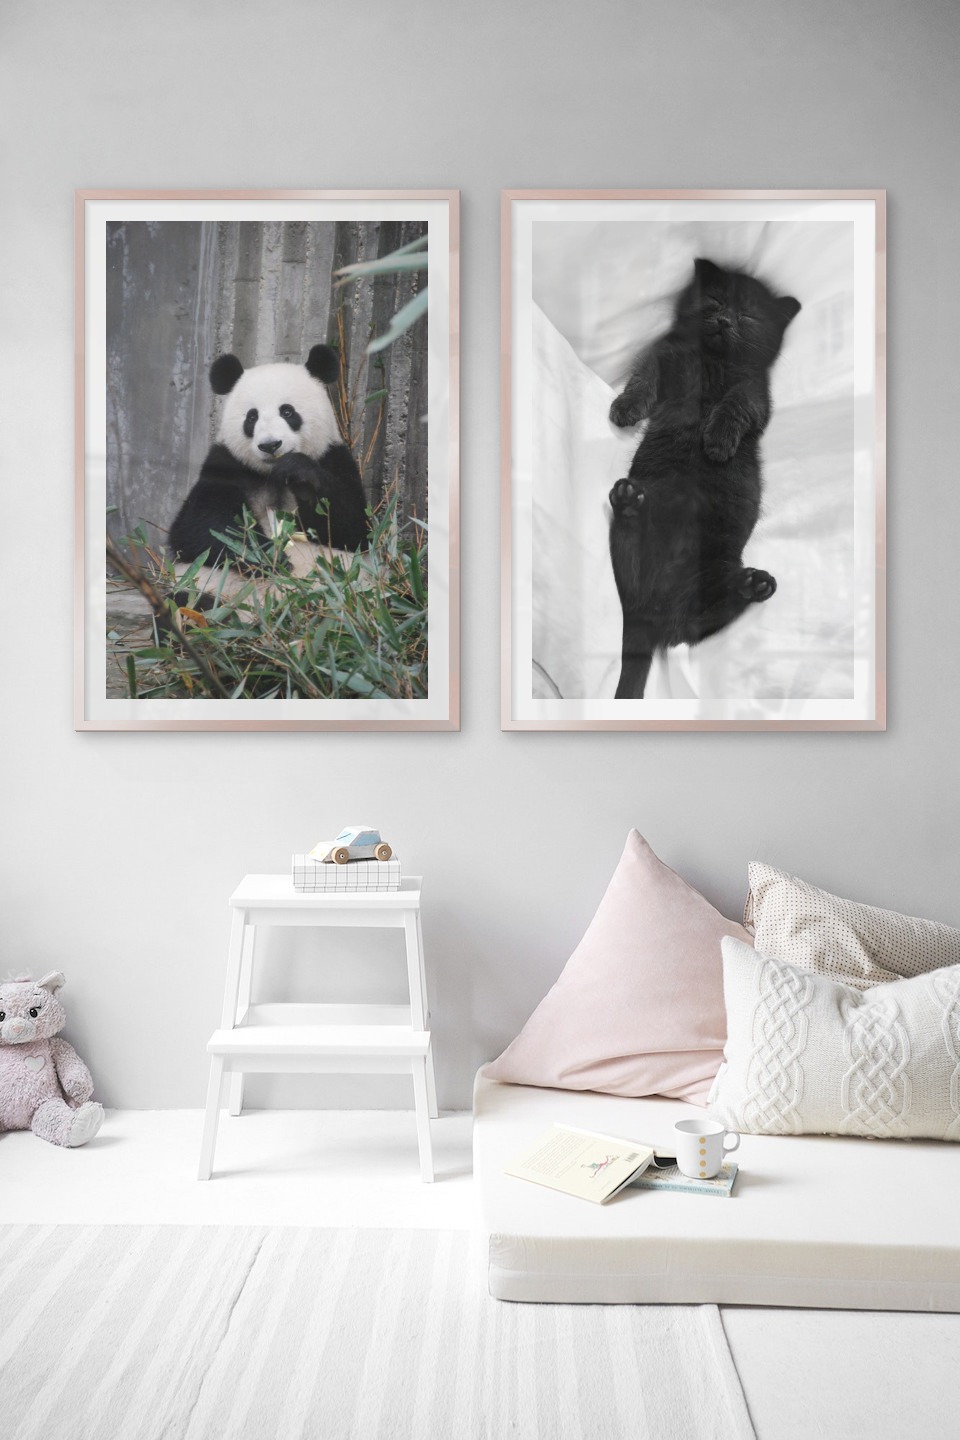 Gallery wall with picture frames in copper in sizes 70x100 with prints "Panda" and "Cat in bed"